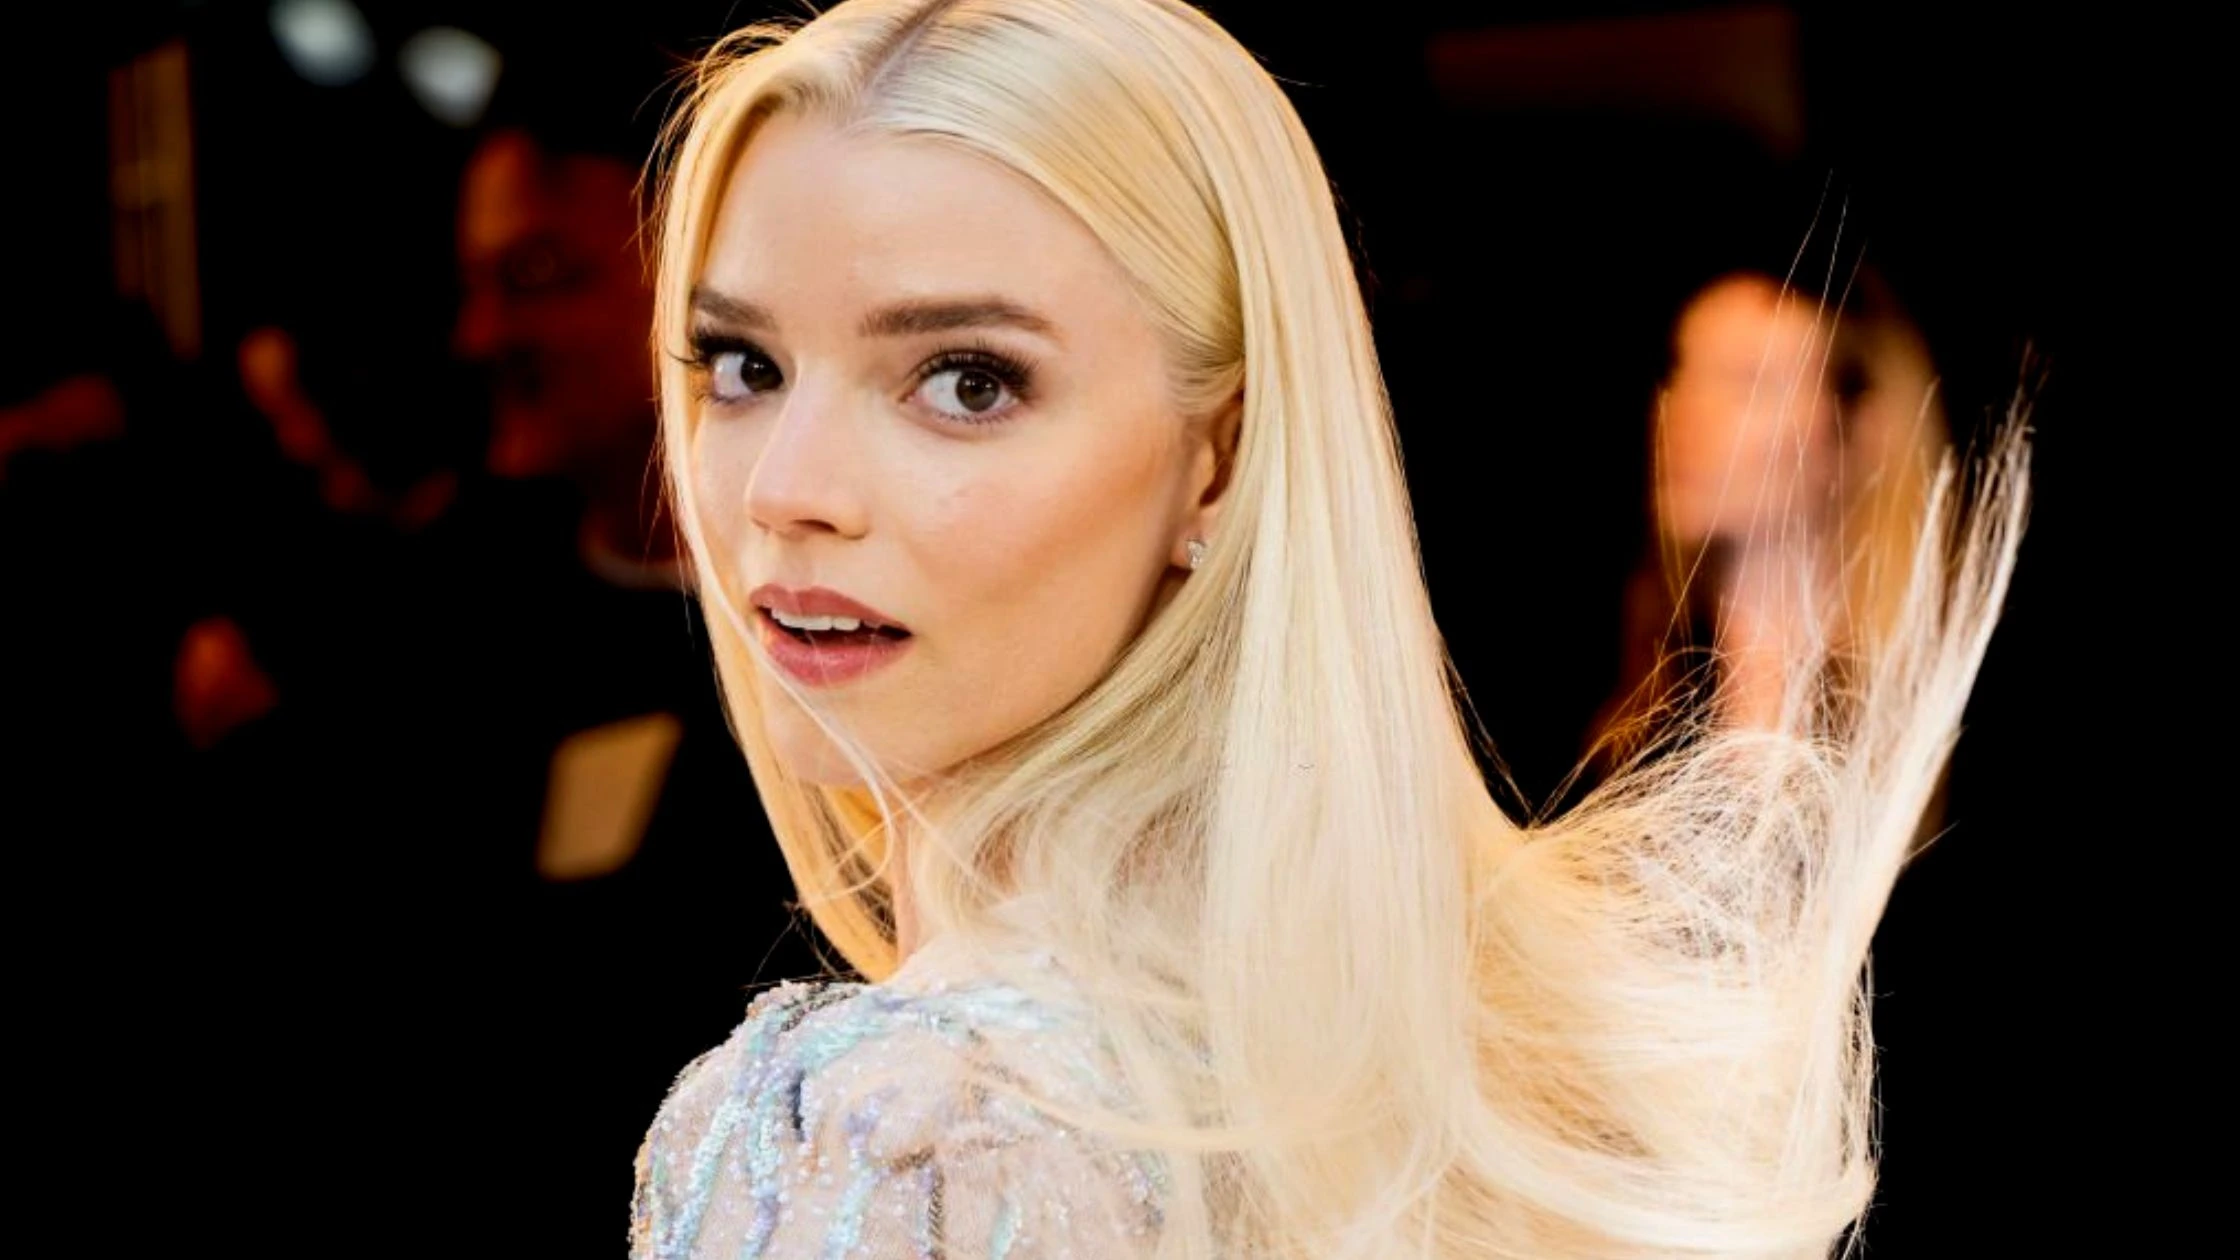 Anya Taylor Joy- Height, Weight, Body Measurement, And More